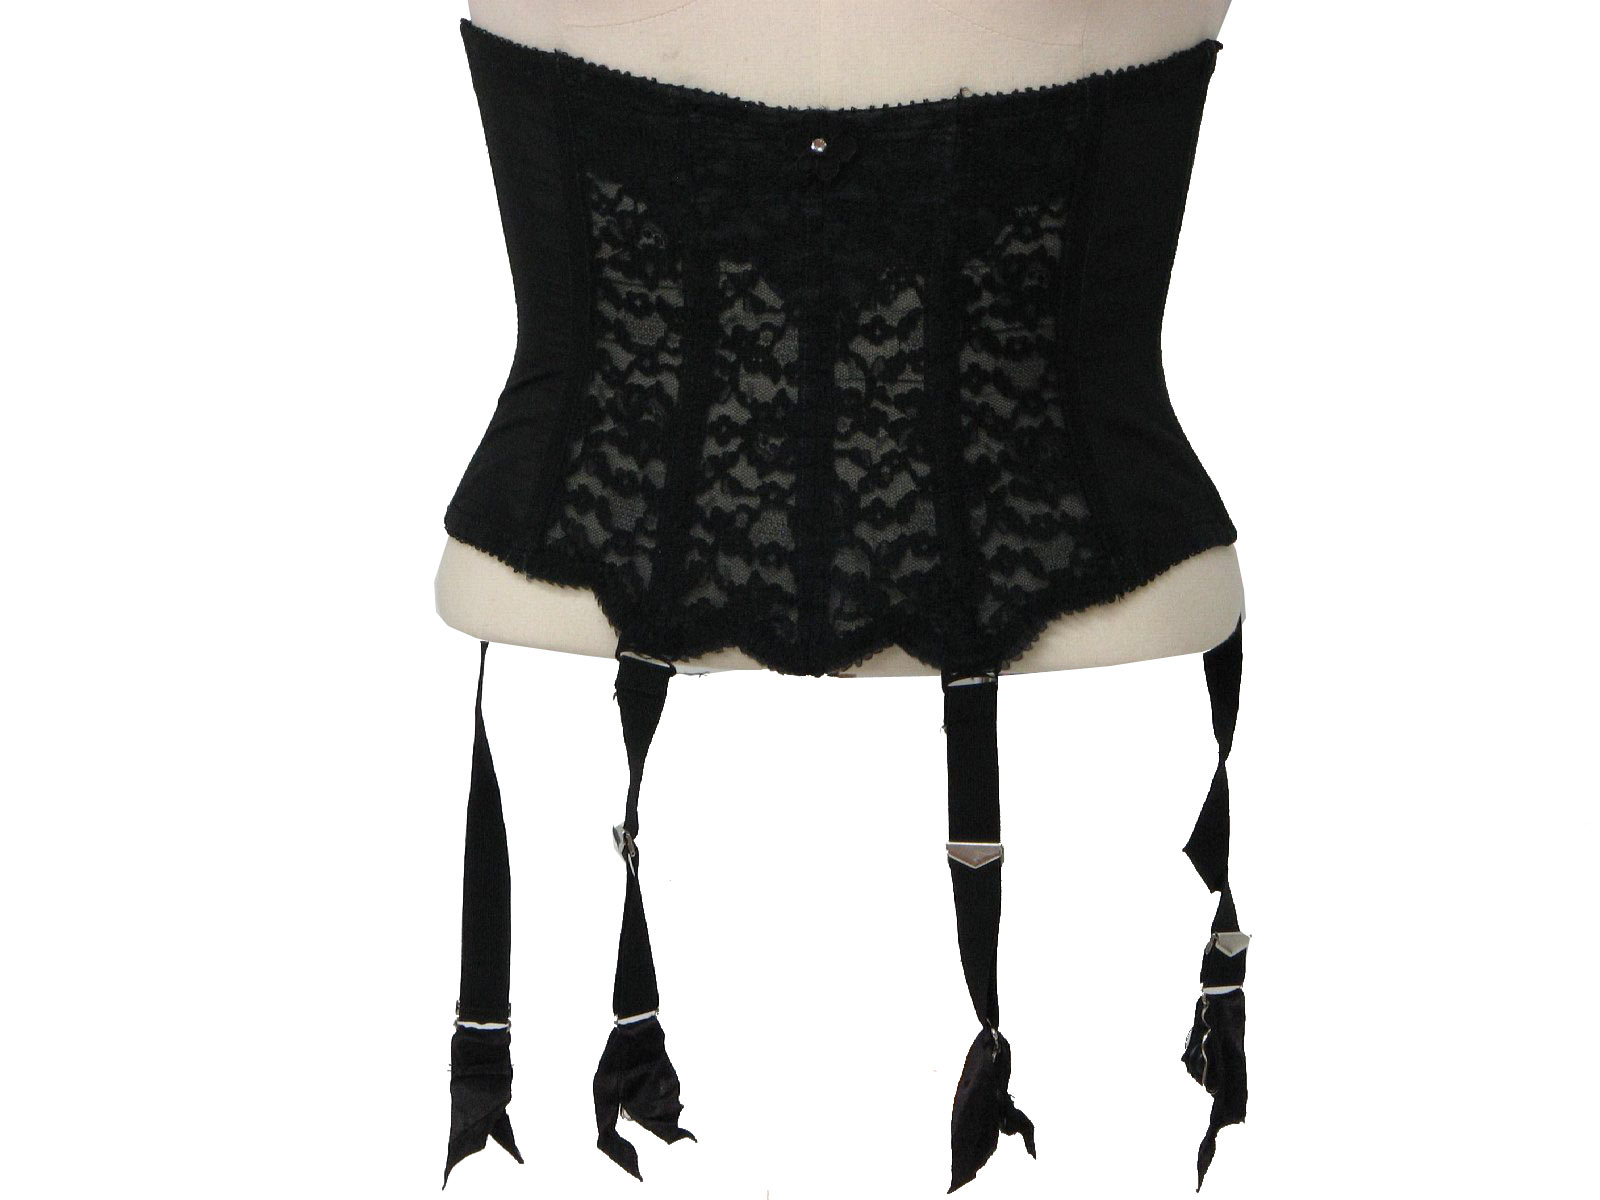 Lightweight Black Girdle: Get that retro look with our Girdlette